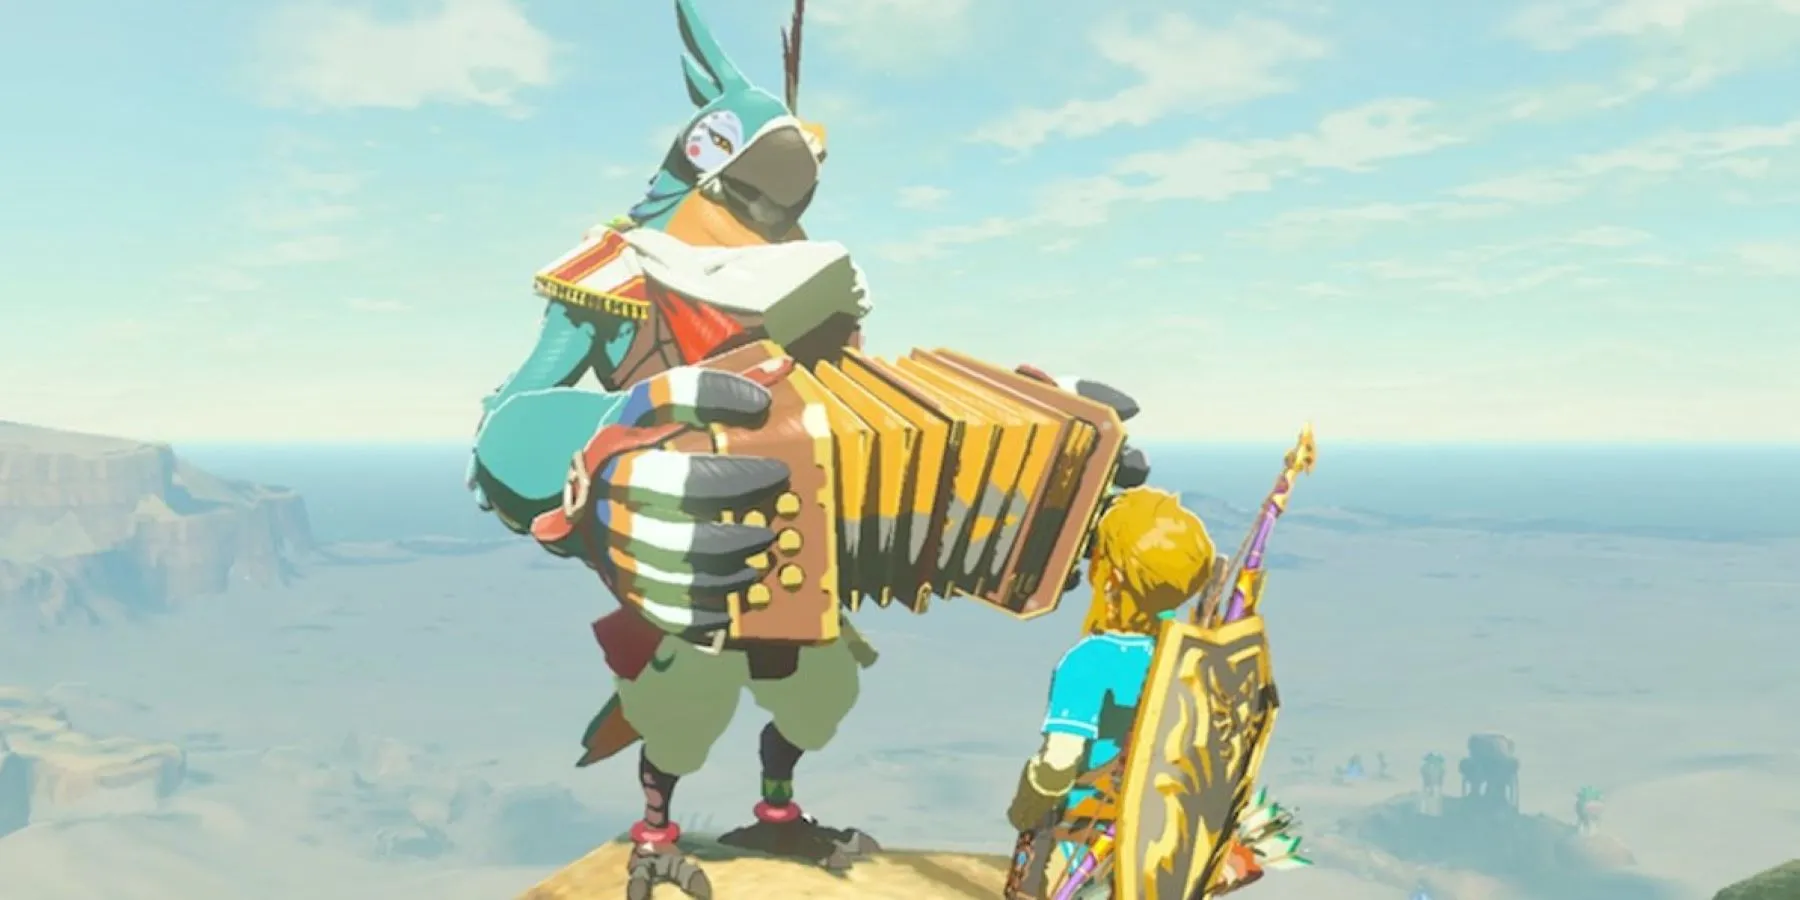 Kass and Link speaking on a mountain over the Gerudo Desert in The Legend of Zelda: Breath of the Wild